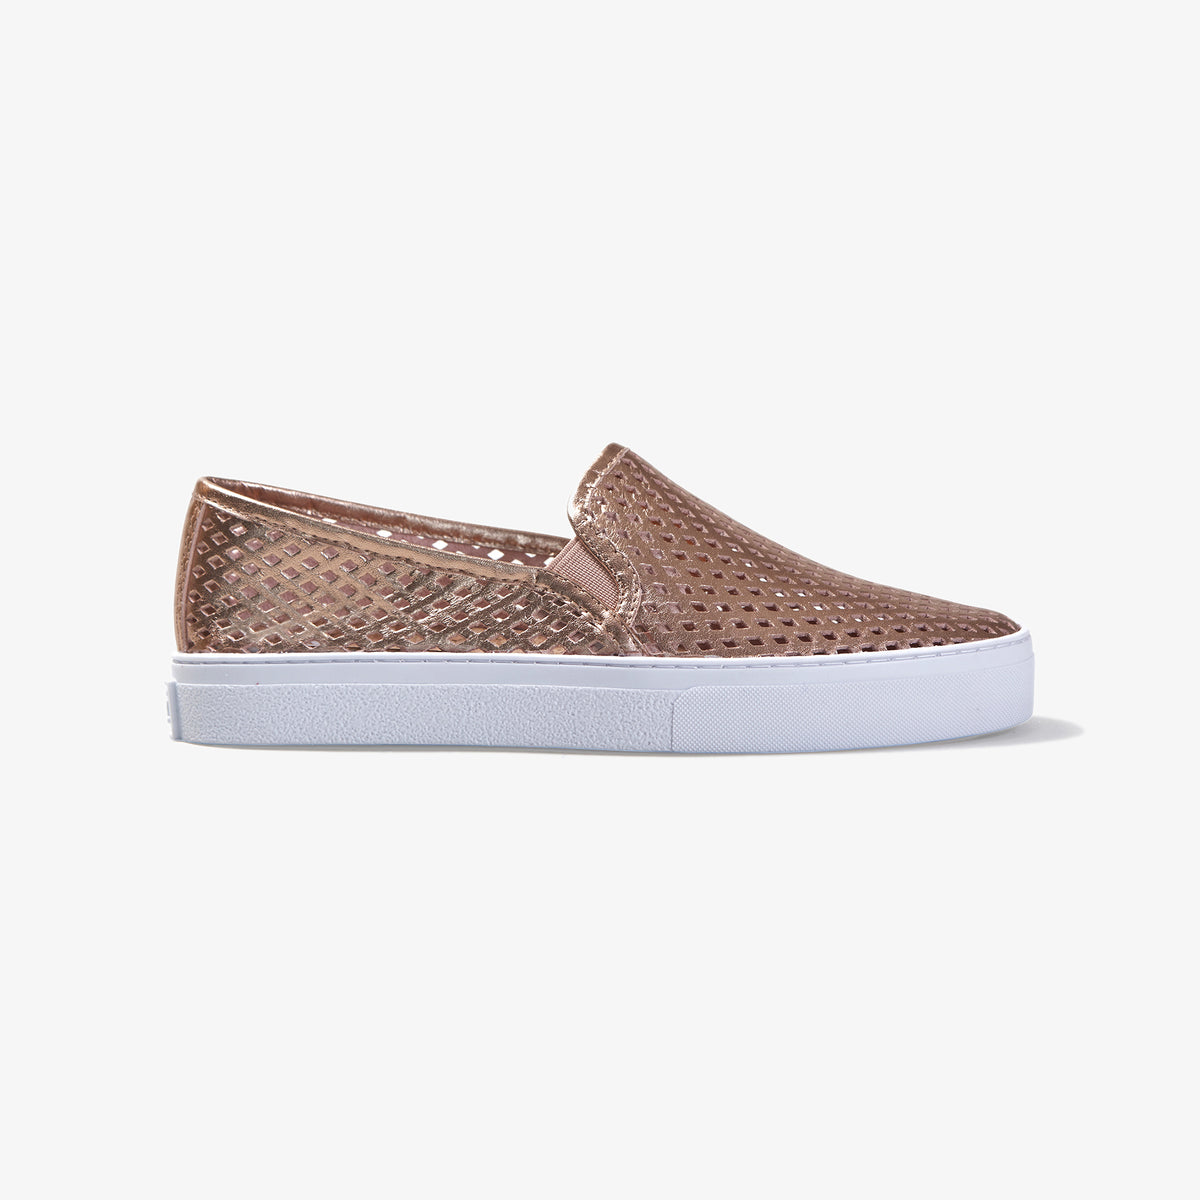 Jibs Classic | Real Leather Slip-on Shoe in Rose Gold Metallic